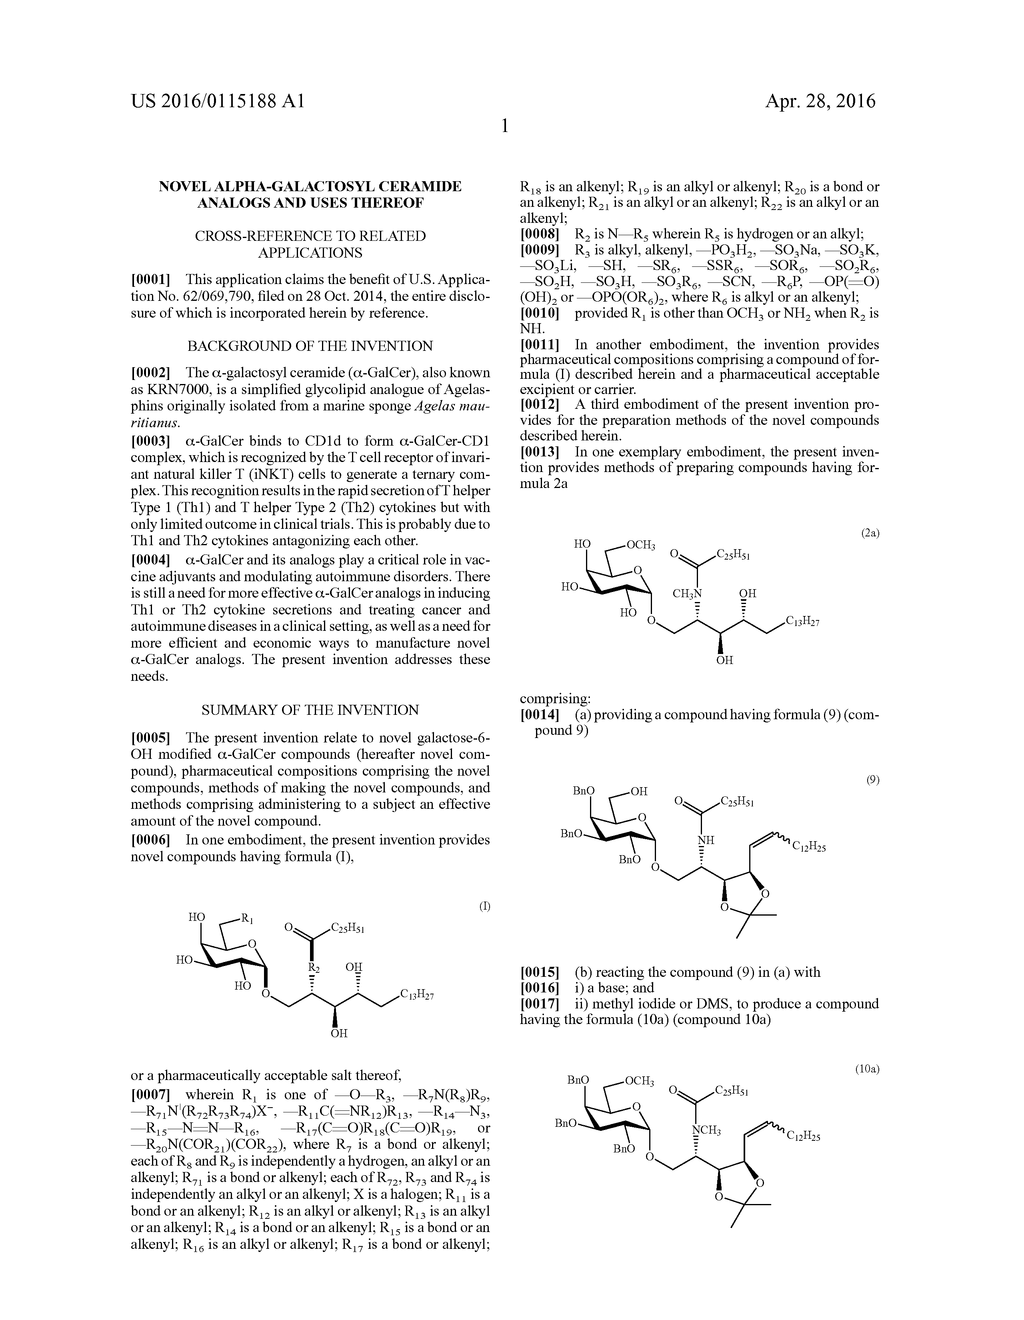 NOVEL alpha-GALACTOSYL CERAMIDE ANALOGS AND USES THEREOF - diagram, schematic, and image 04